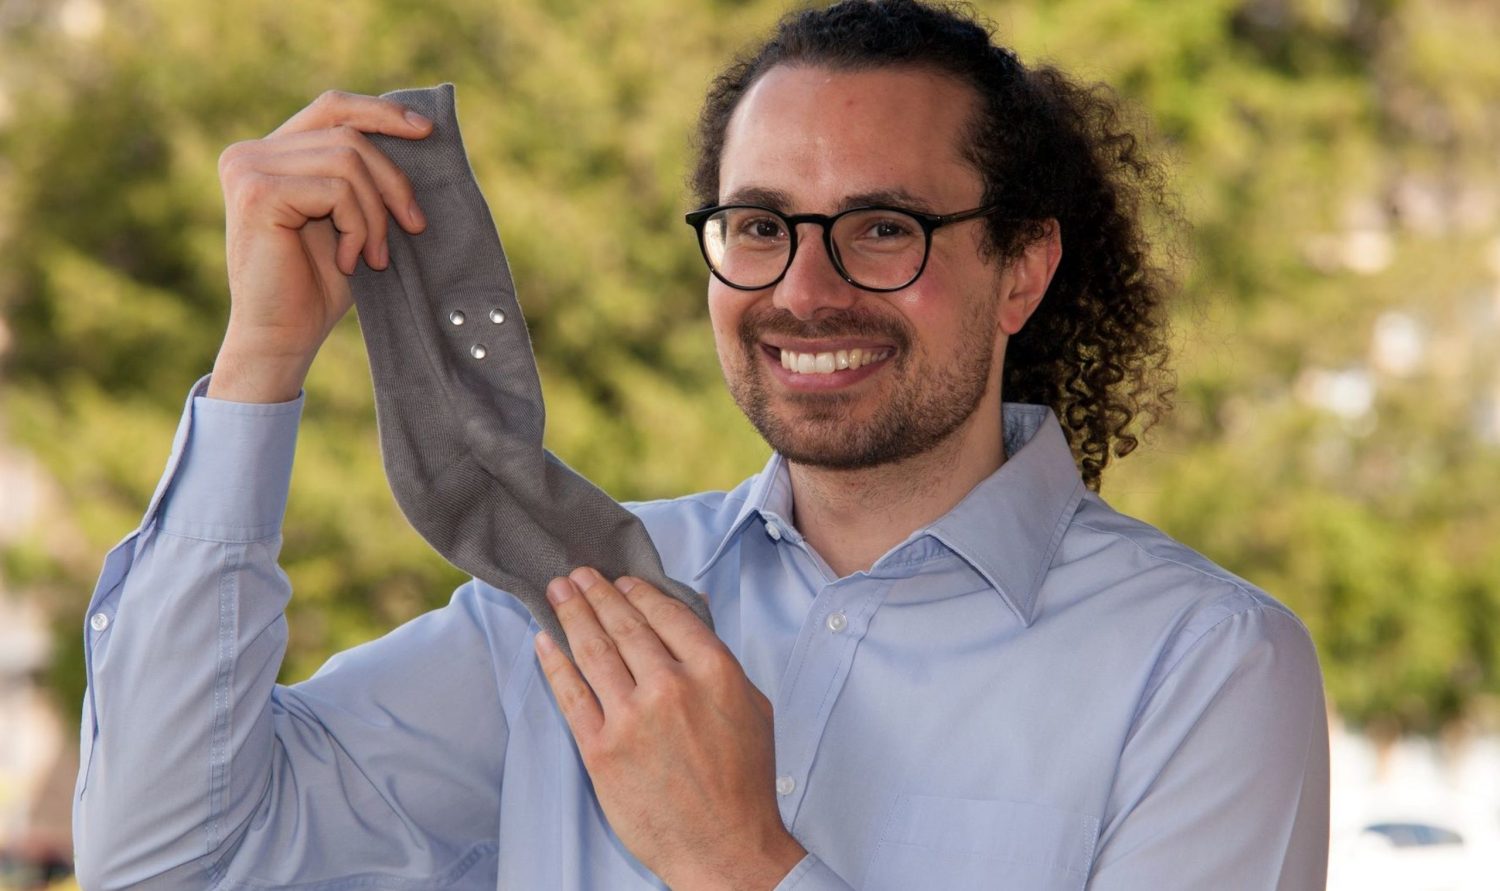 Milbotix wins Future Economy funding to bring Smart Socks to those living with Dementia